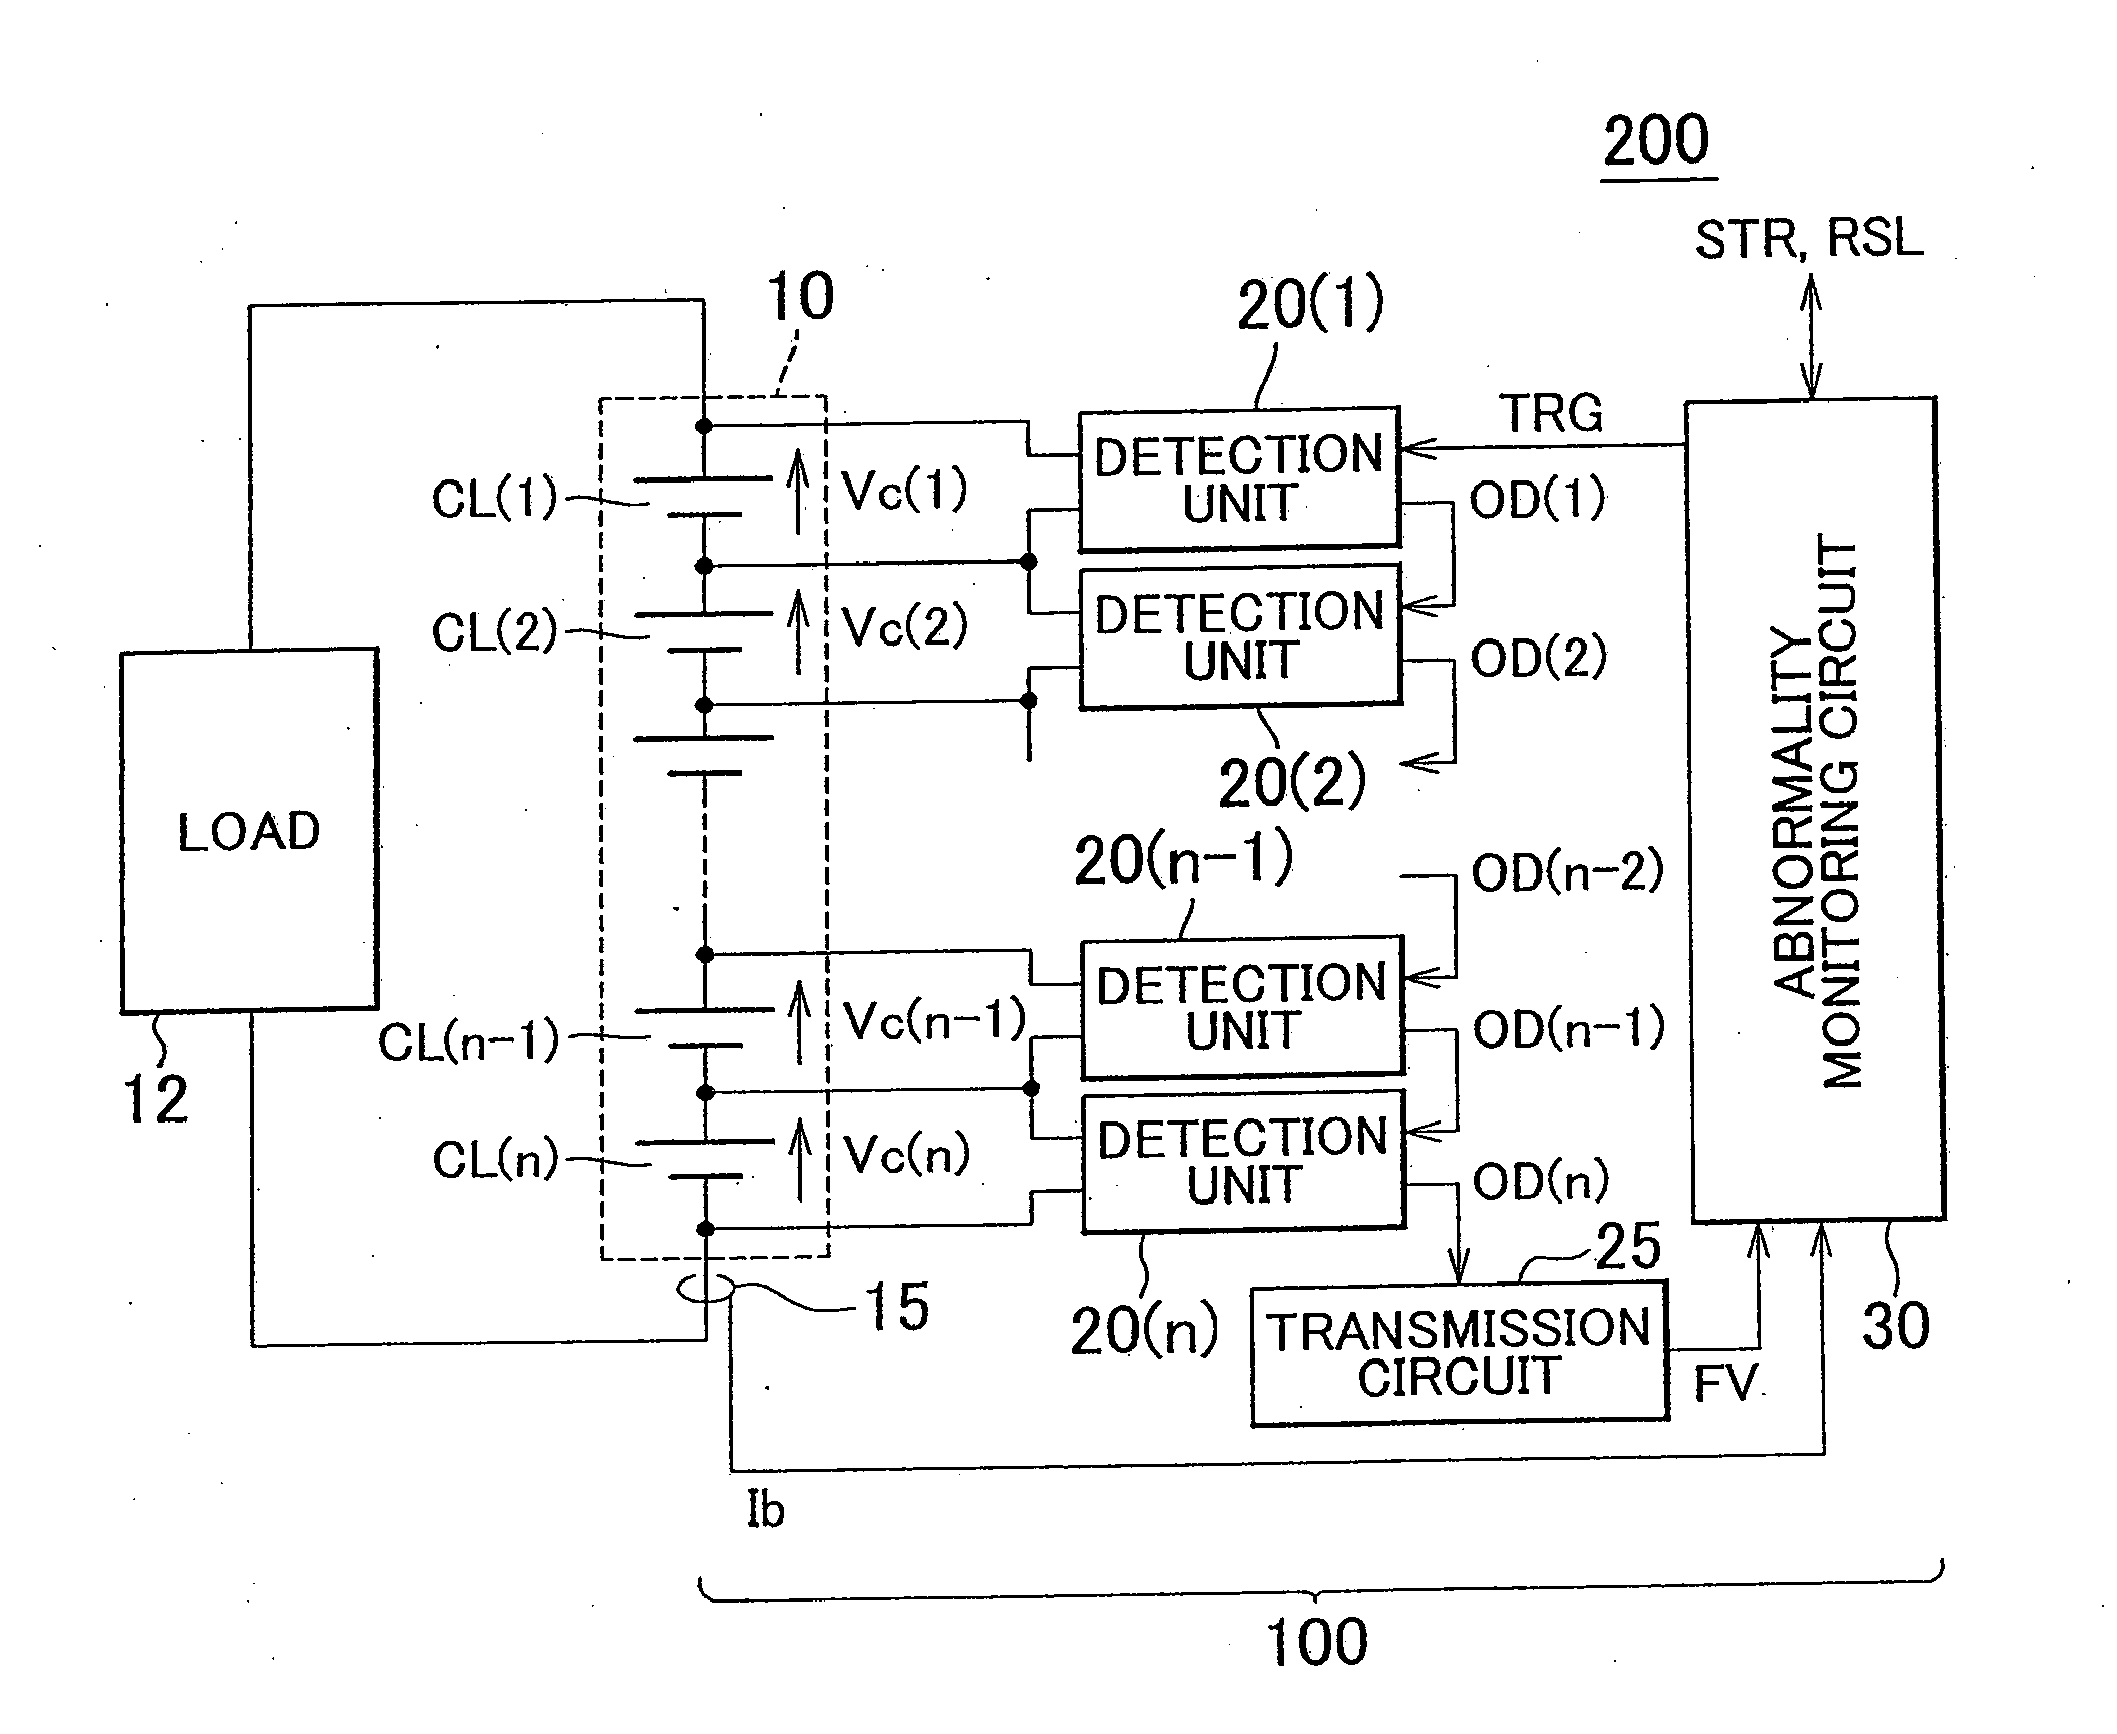 Abnormality detecting system for battery assembly